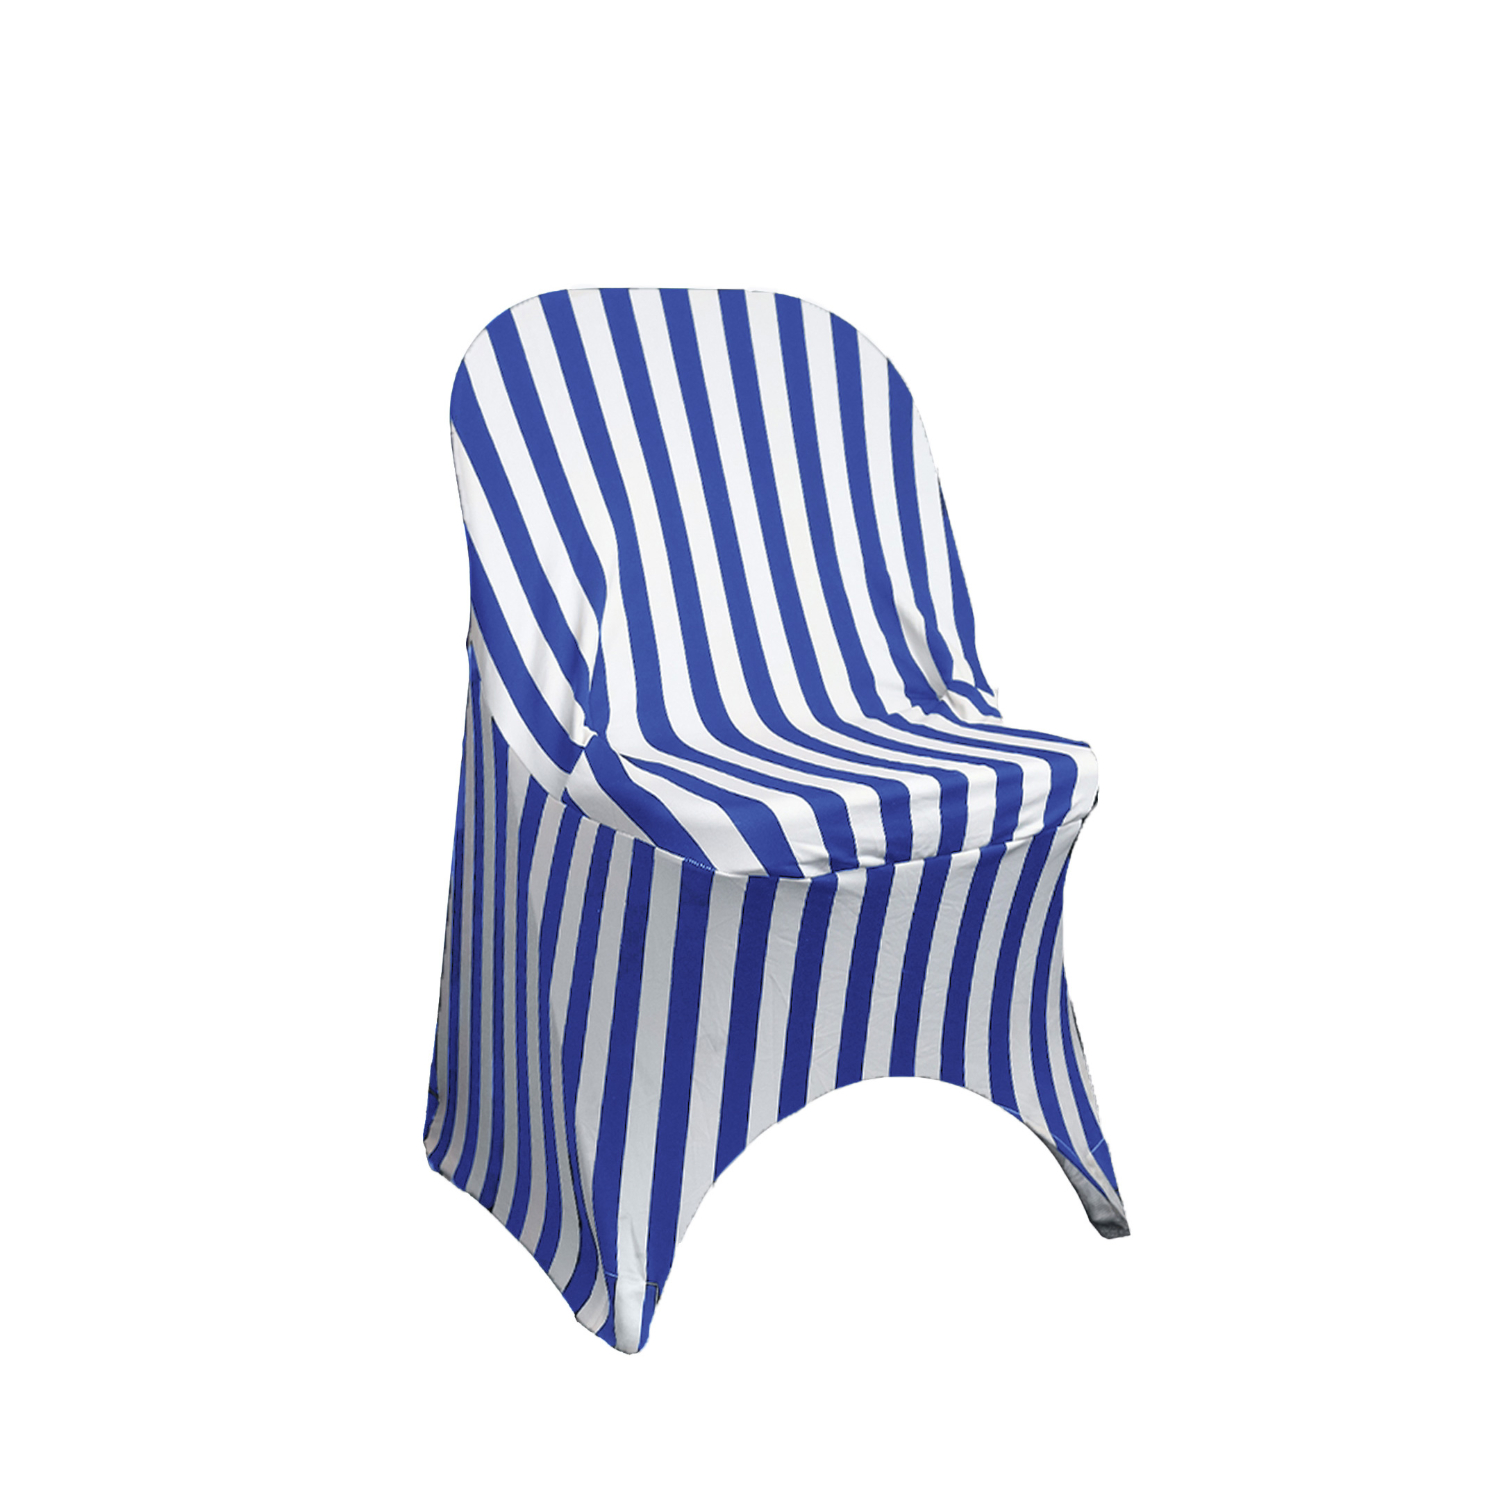 Your Chair Covers - Stretch Spandex Folding Chair Covers Striped Royal Blue/White for Wedding, Party, Birthday, Patio, etc. - image 1 of 3